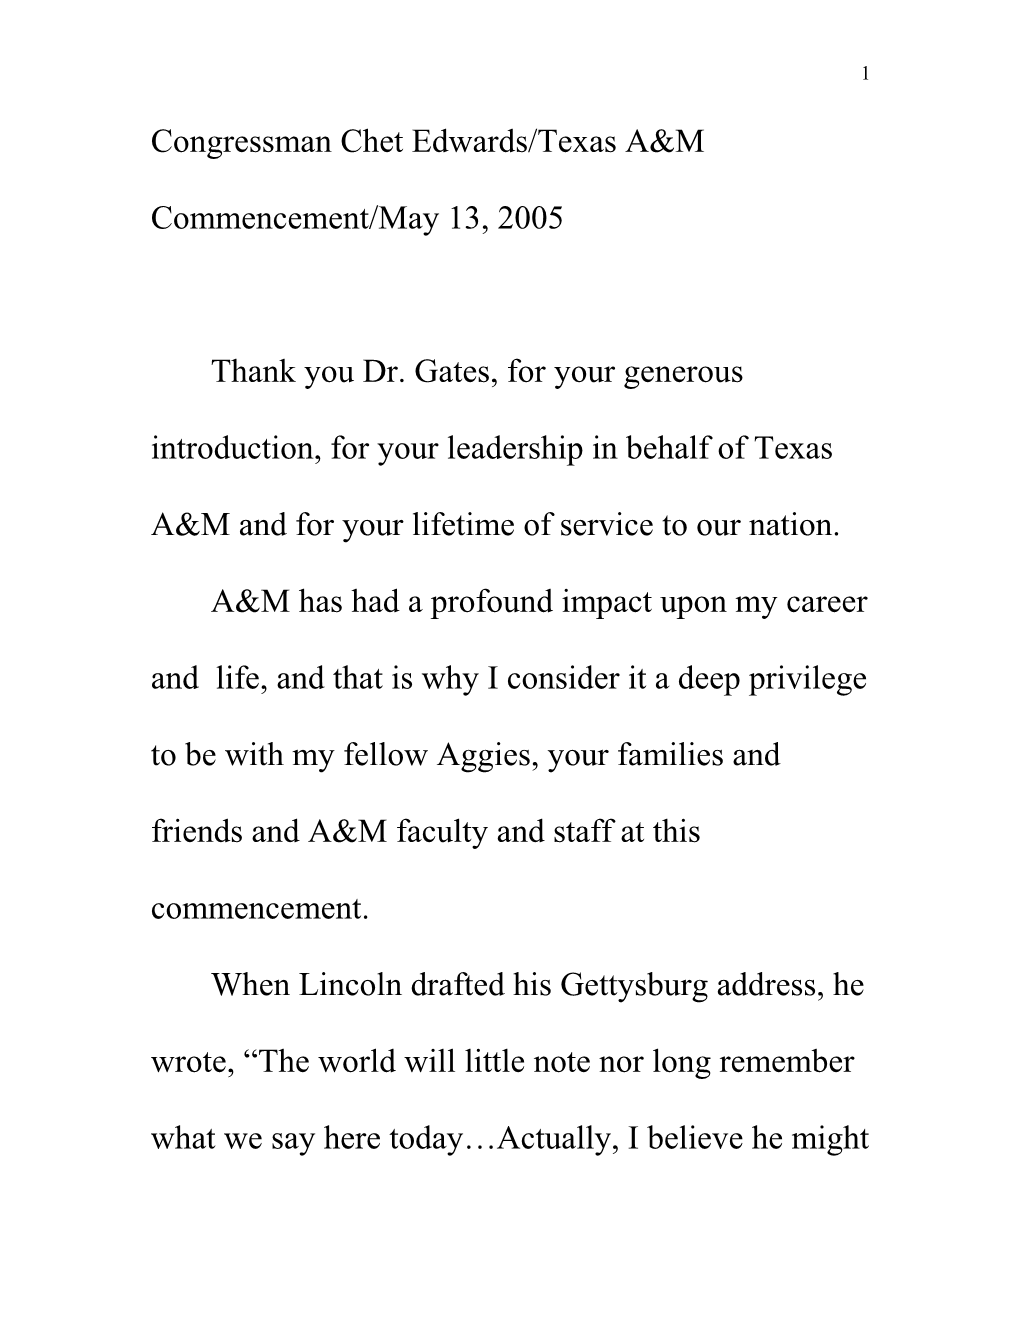 Texas A&M Has Had a Profound Impact Upon My Career, My Life and My Values, and That Is